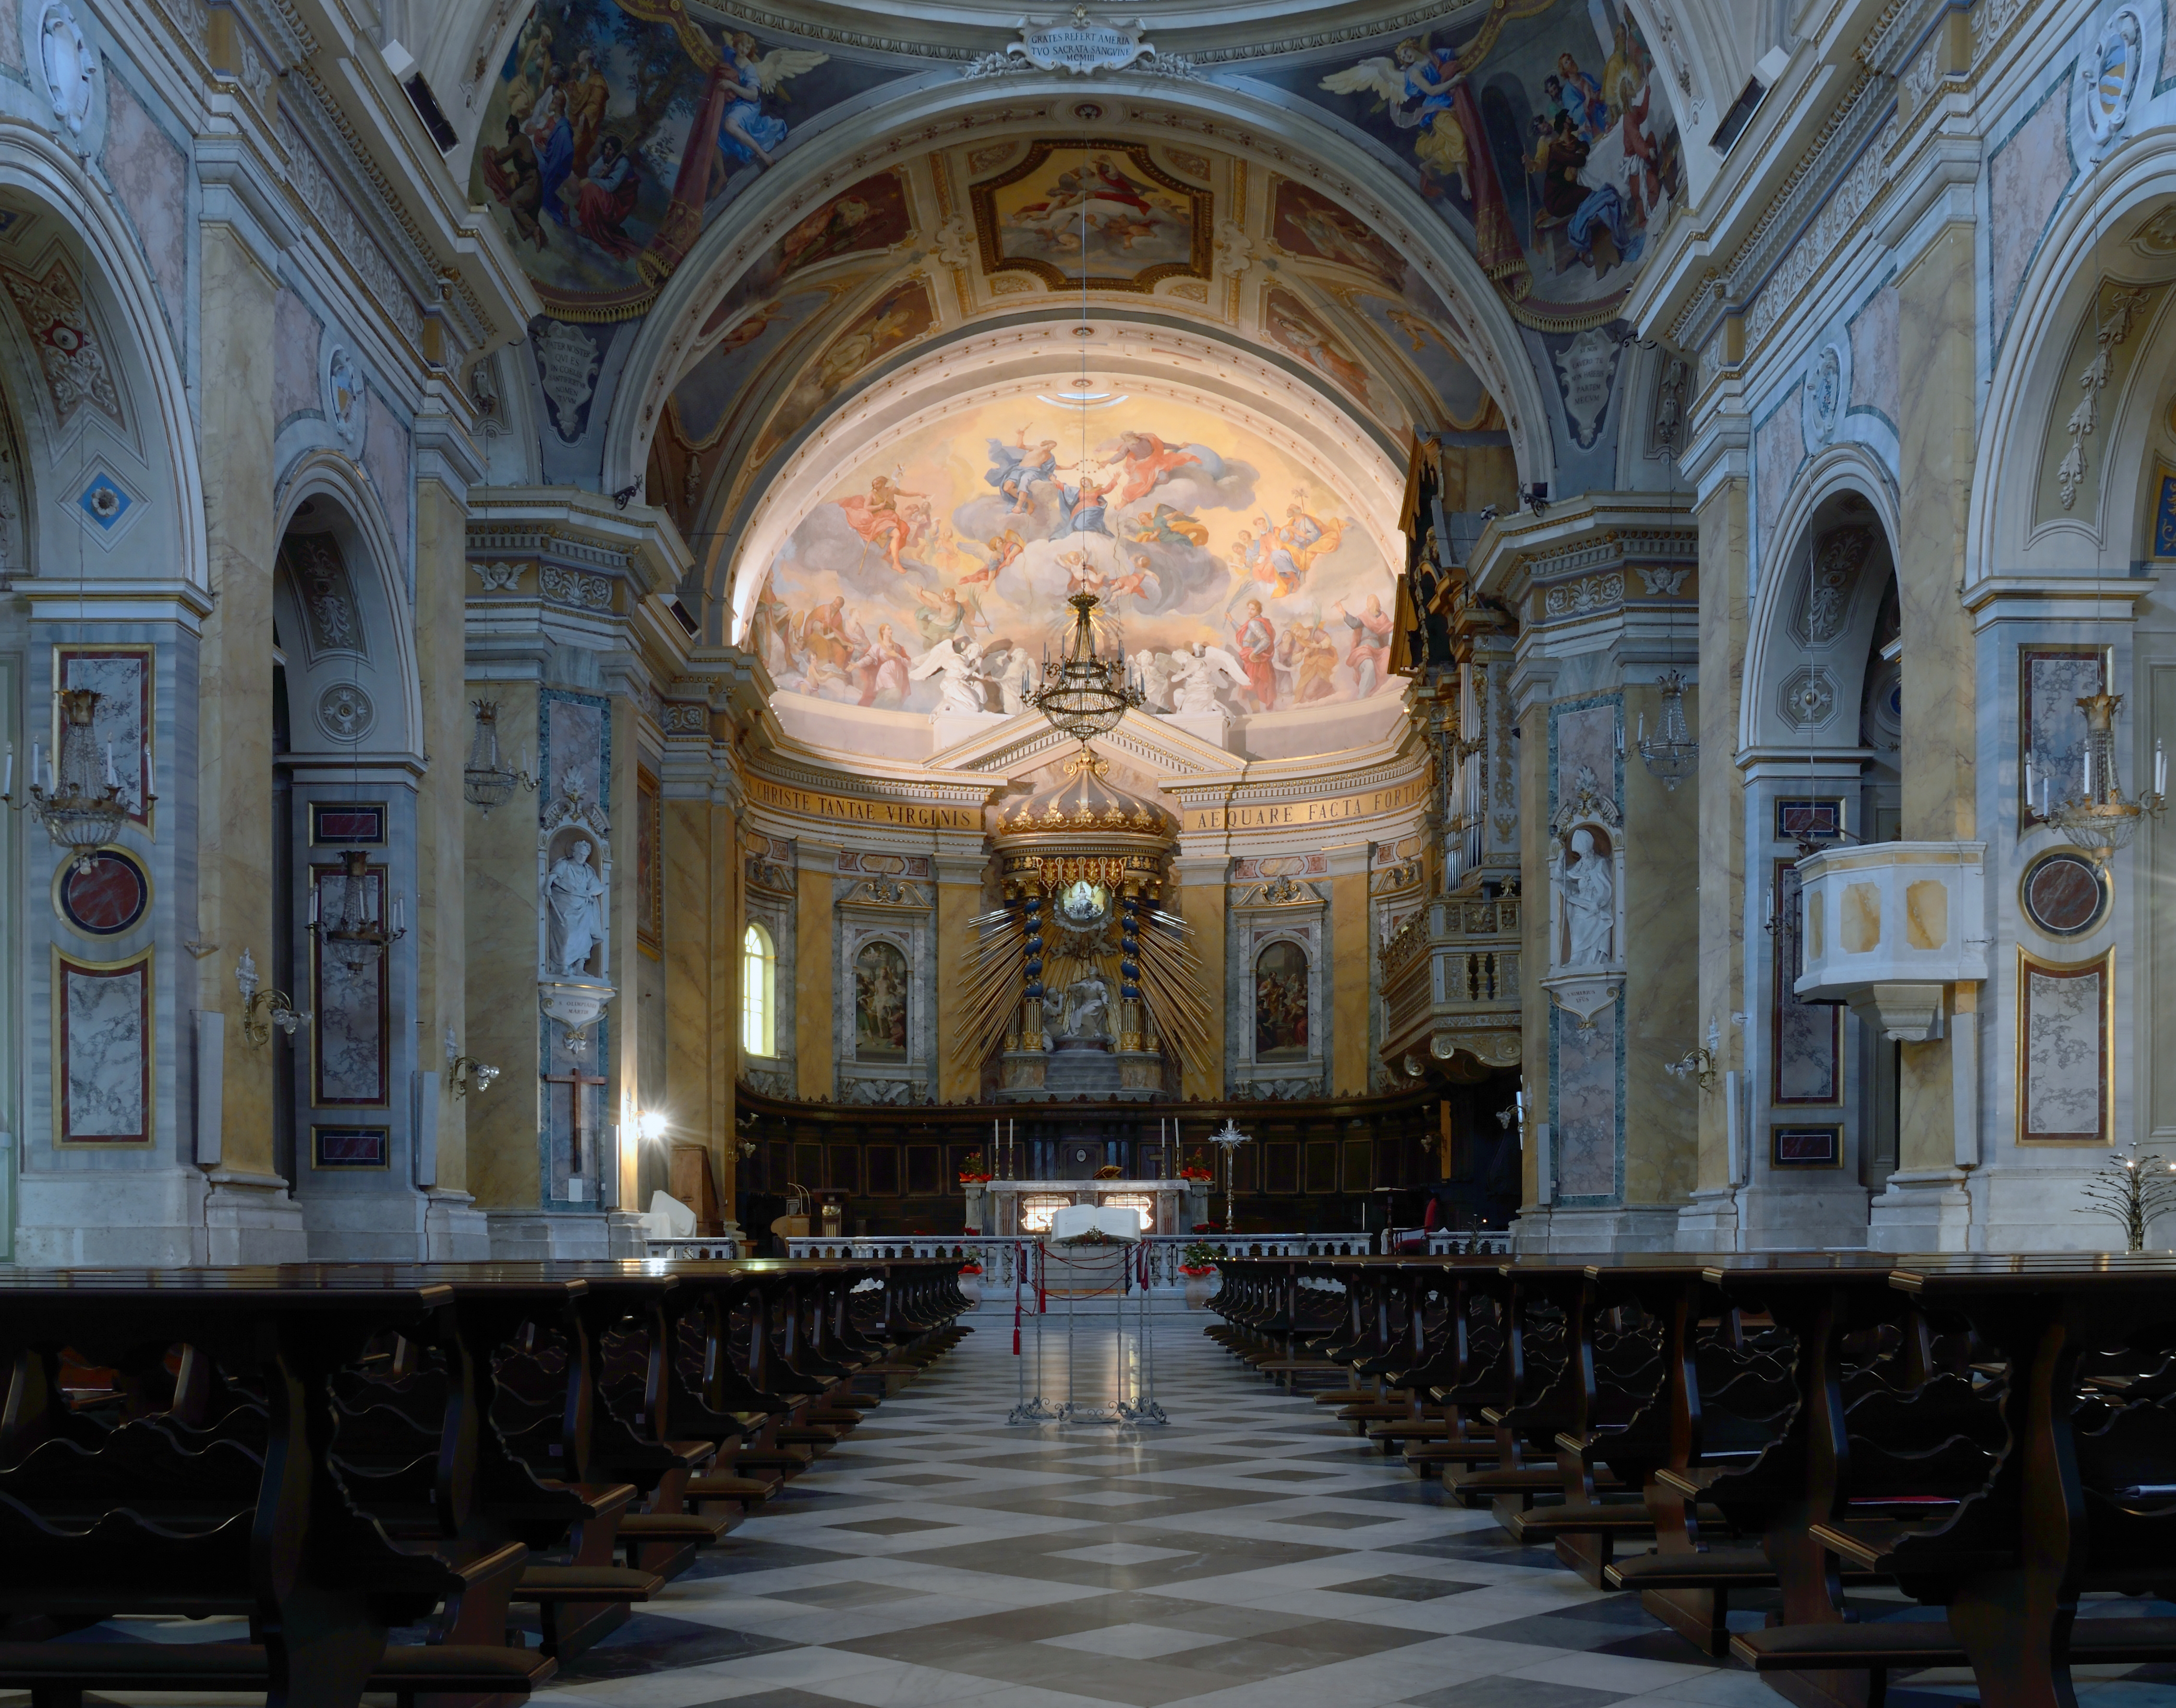 Inside the Cathedral of Amelia